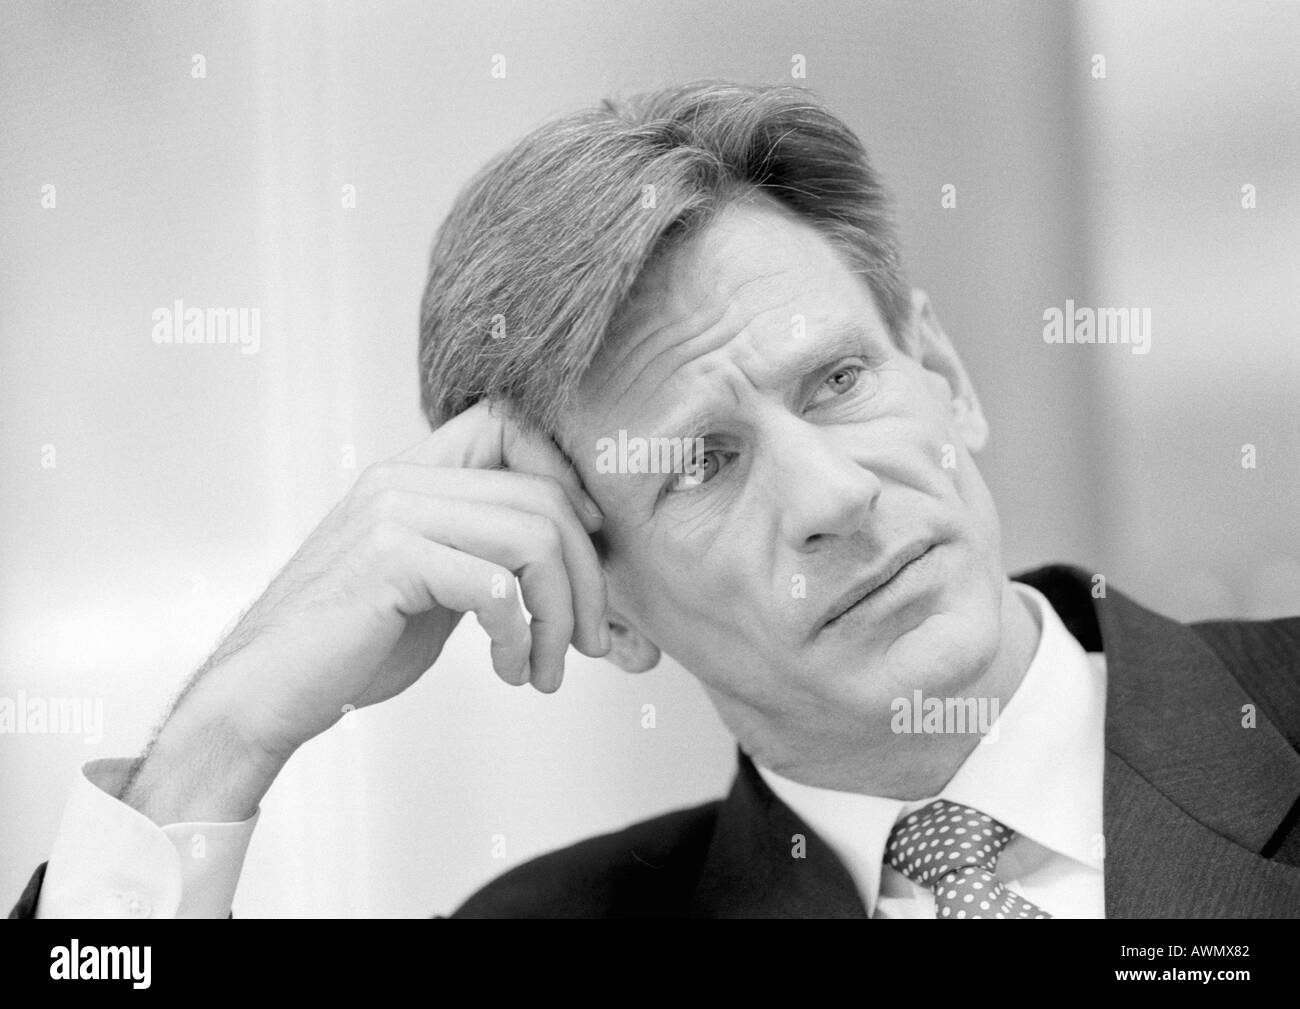 Businessman leaning head on hand and furrowing brow, close-up, black and white. Stock Photo